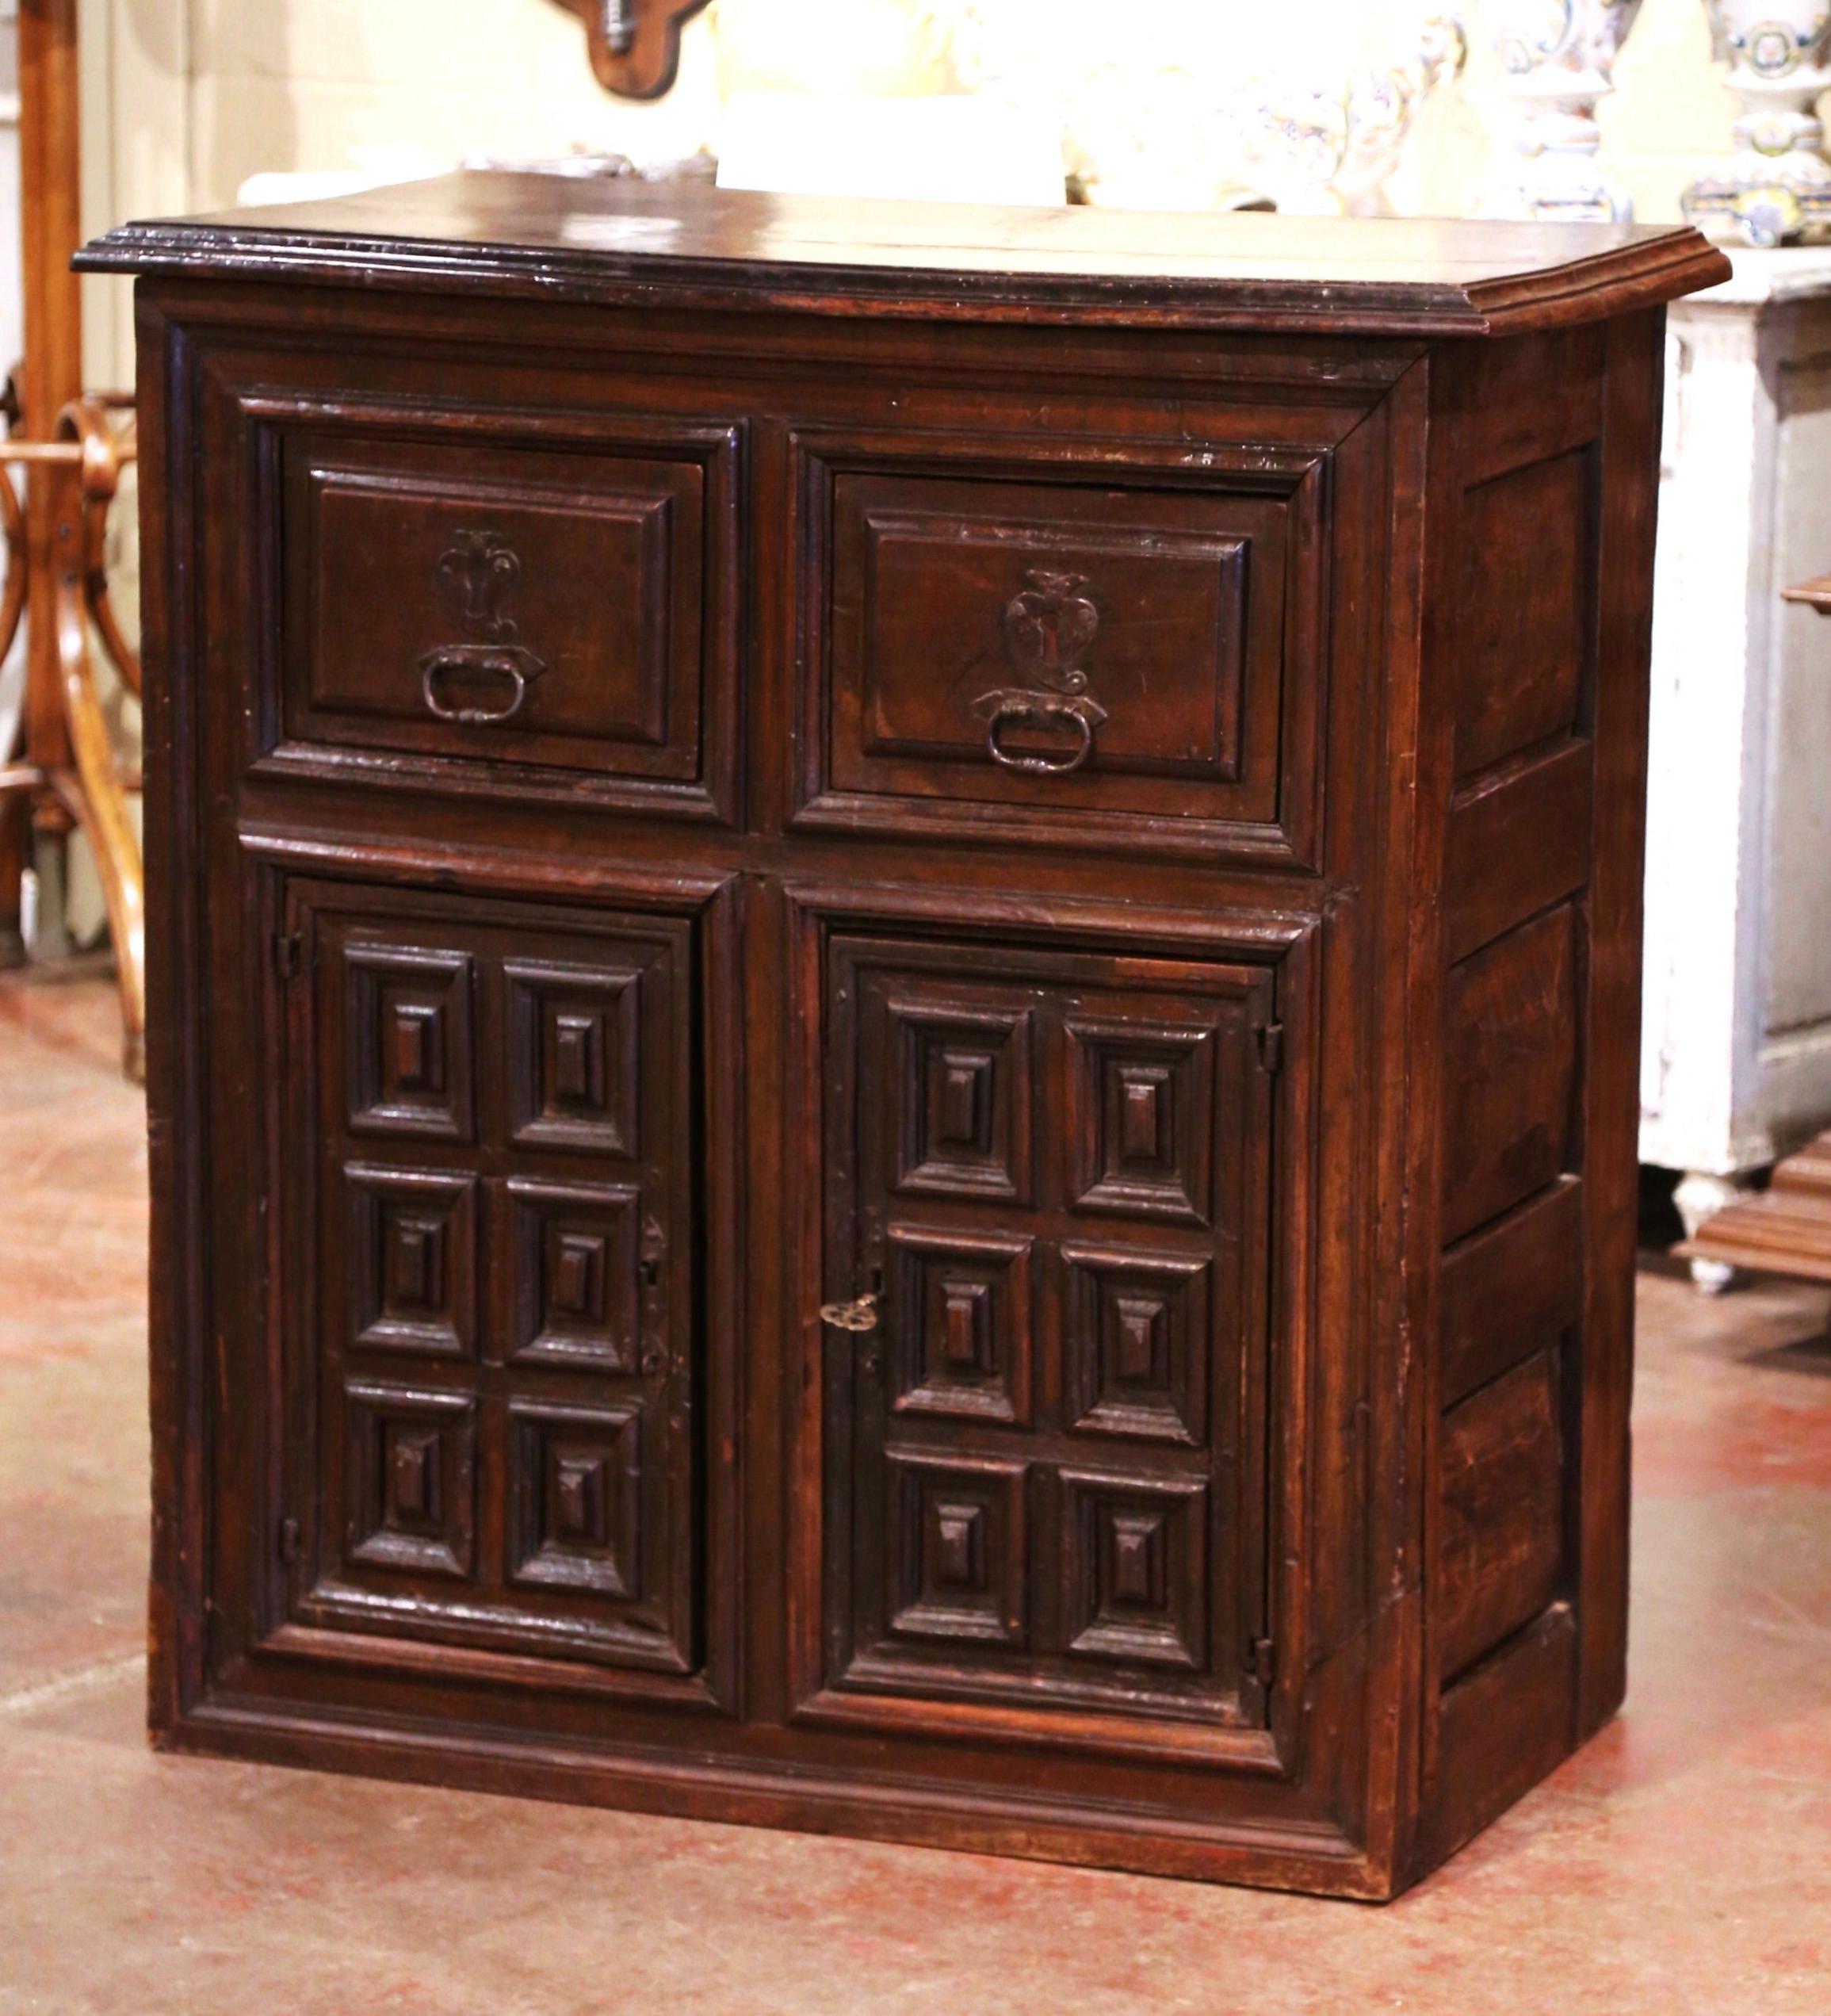 Patinated 17th Century Spanish Catalan Carved Walnut Two-Door Buffet Cabinet